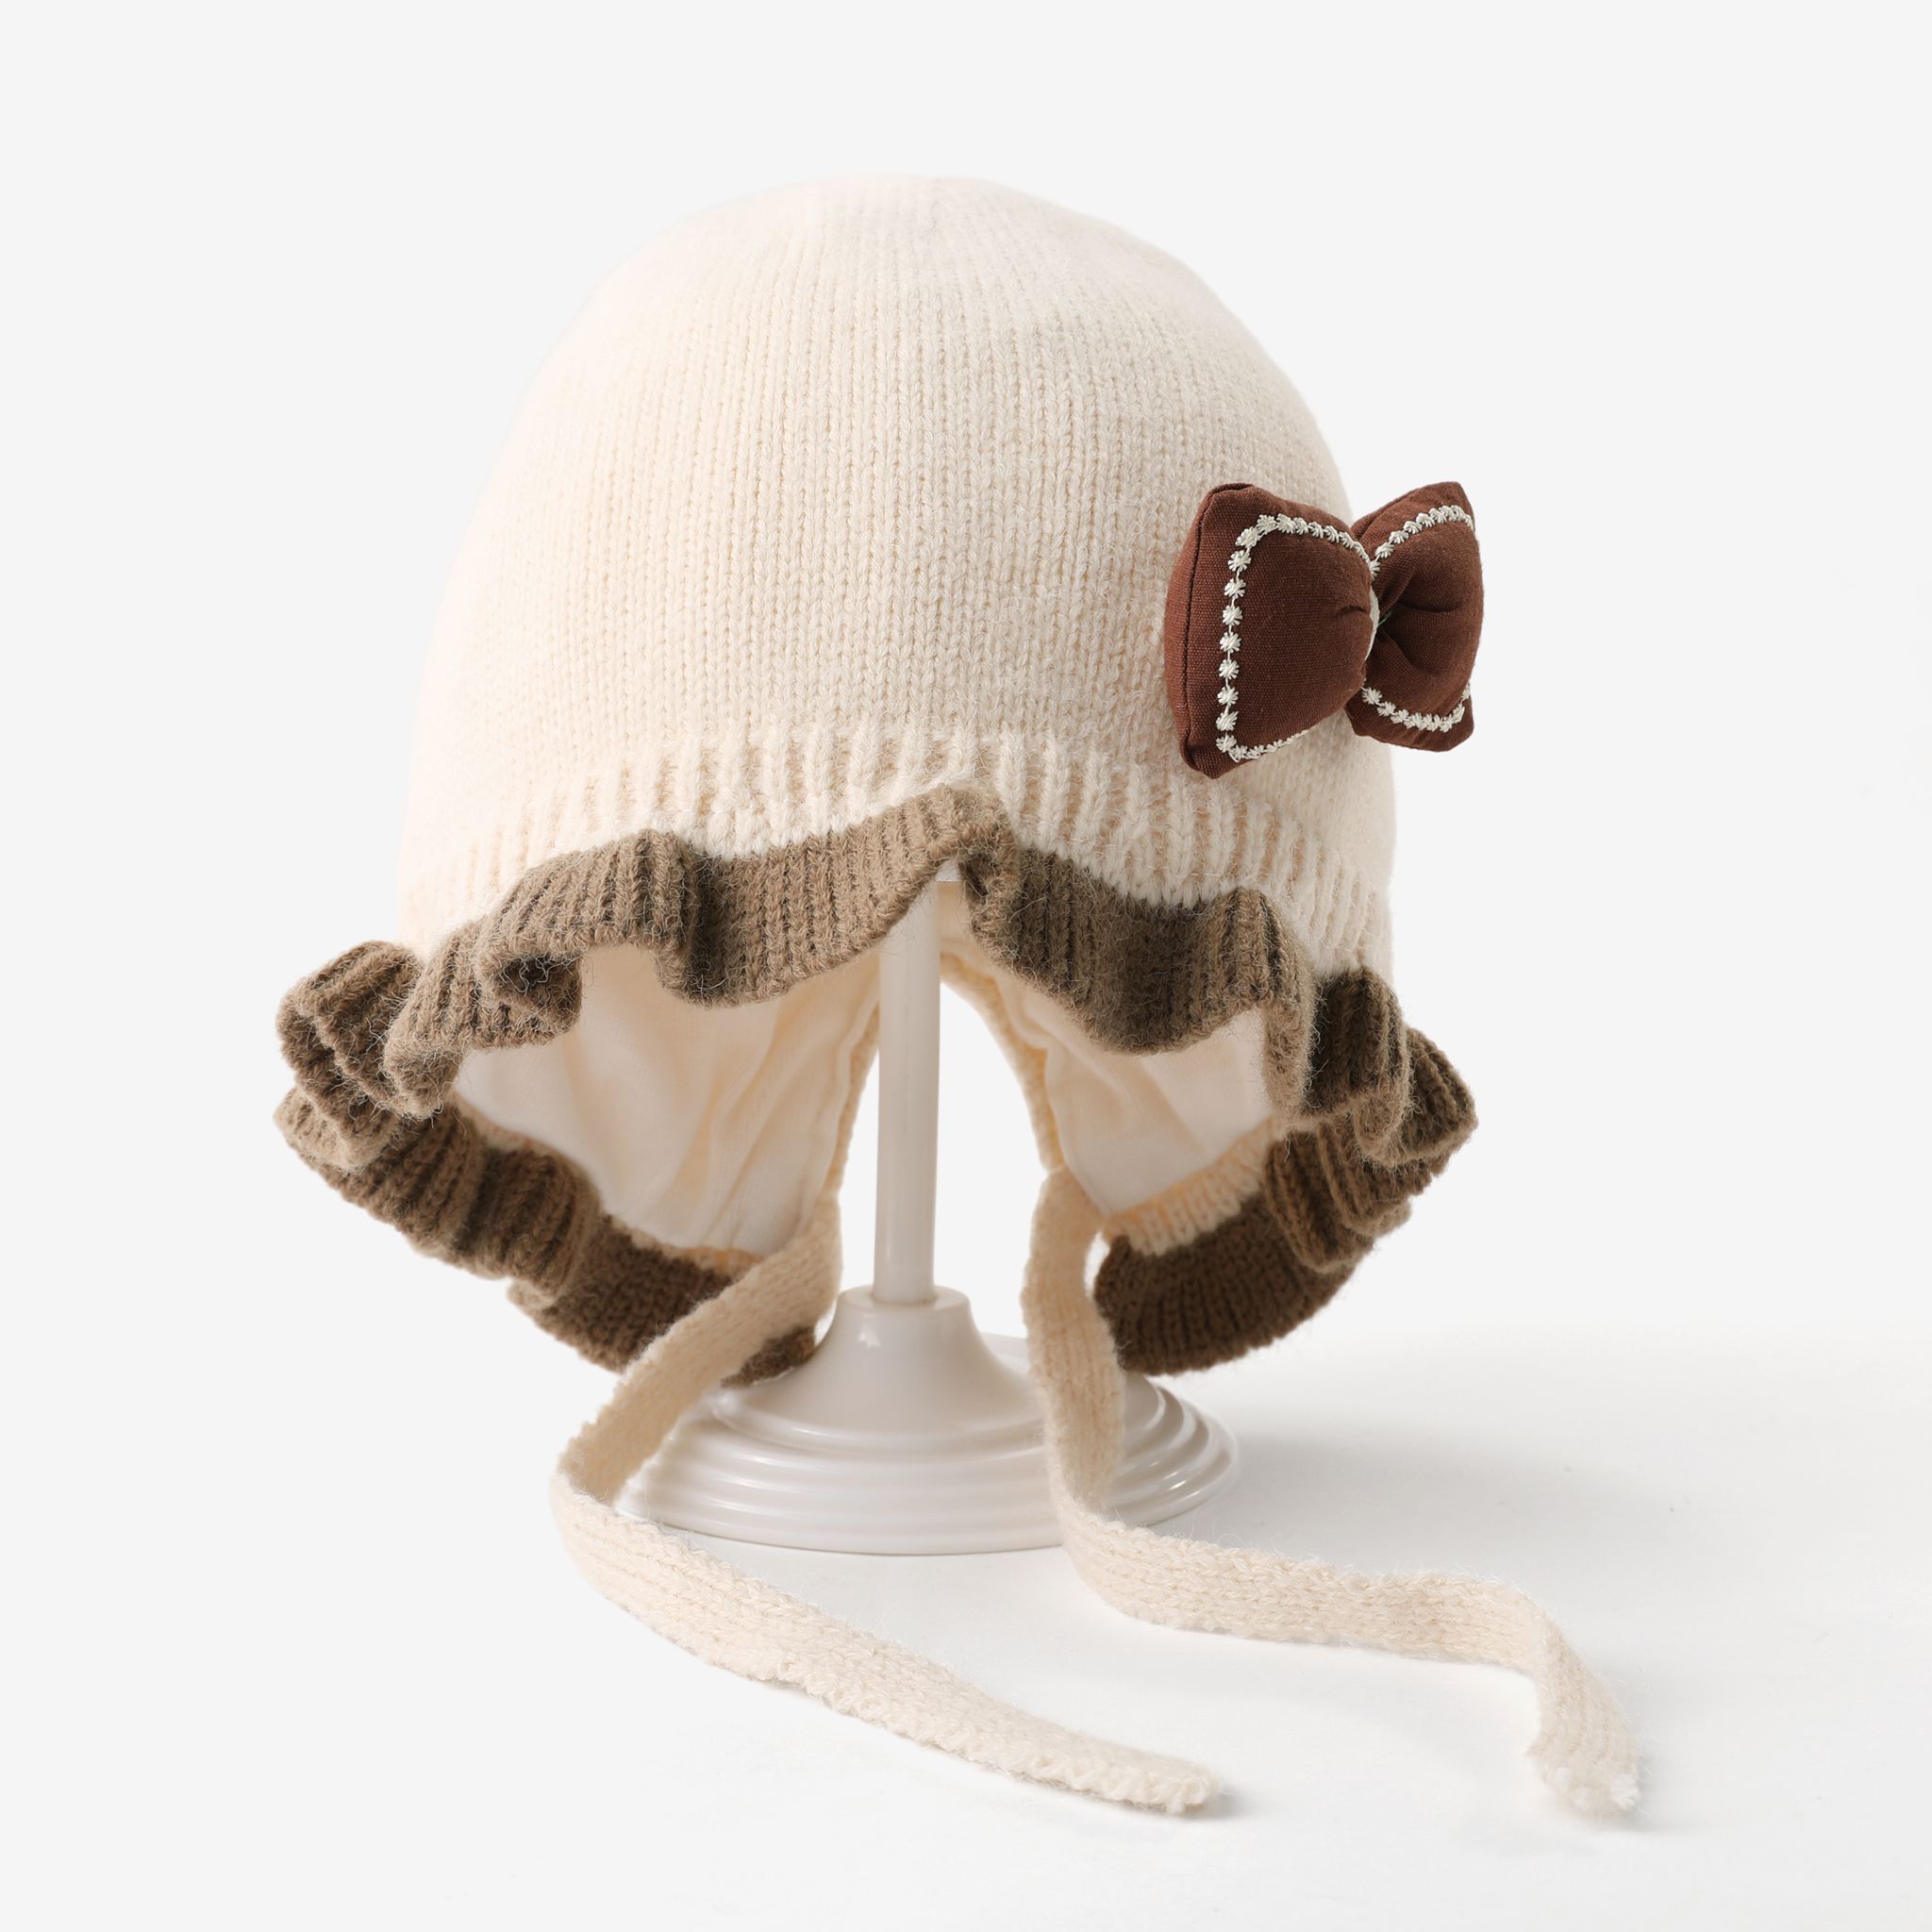 Baby's cute princess knitted hat with bow